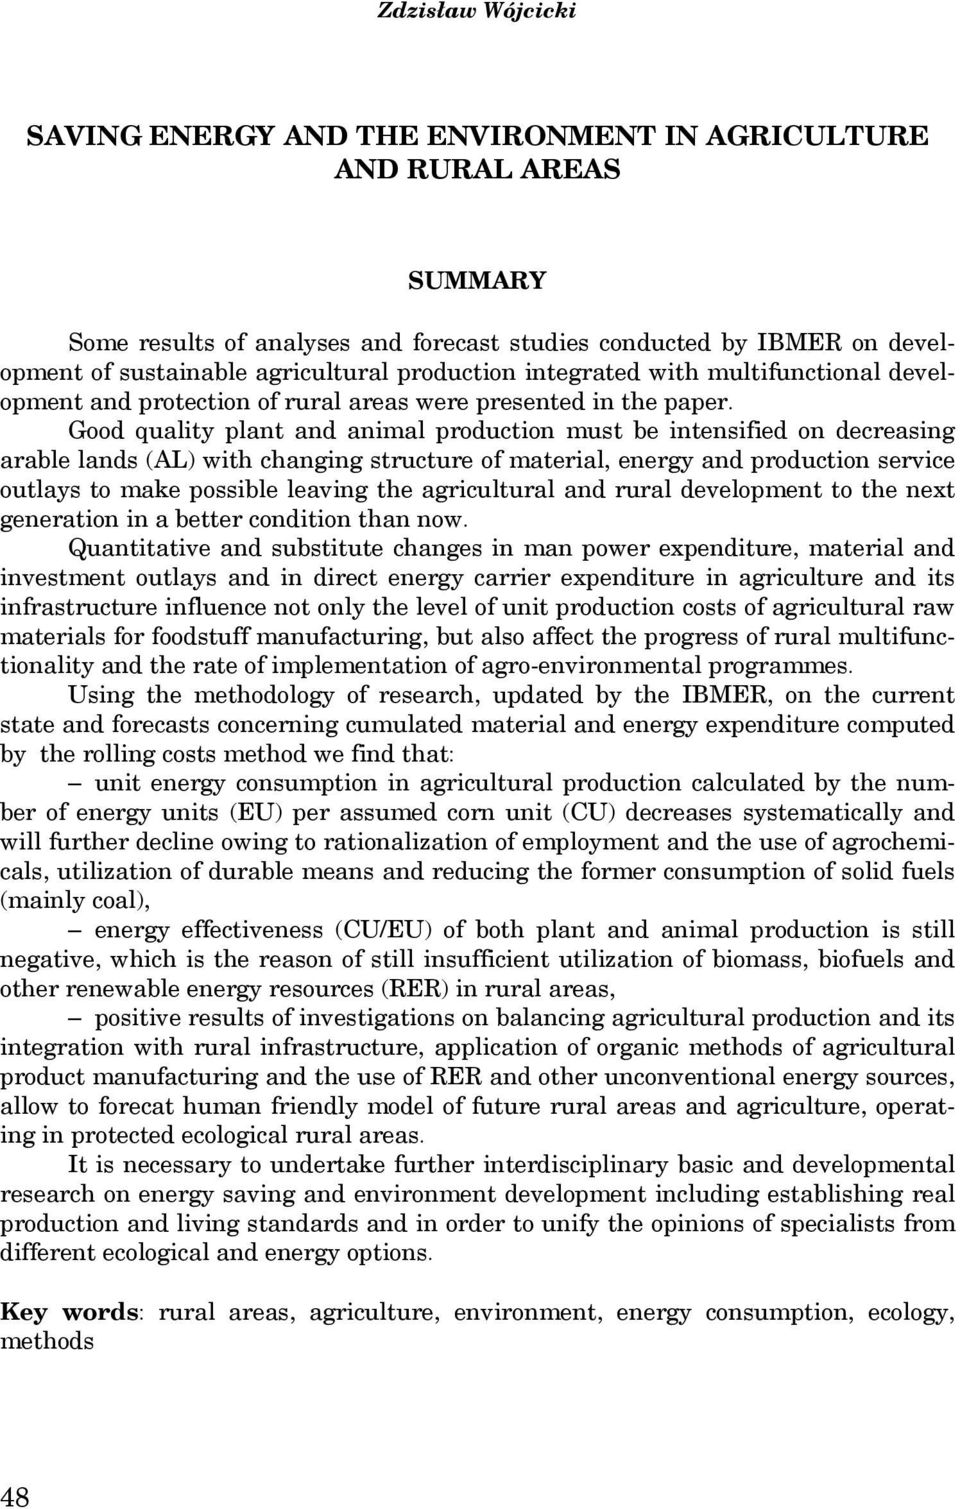 Good quality plant and animal production must be intensified on decreasing arable lands (AL) with changing structure of material, energy and production service outlays to make possible leaving the